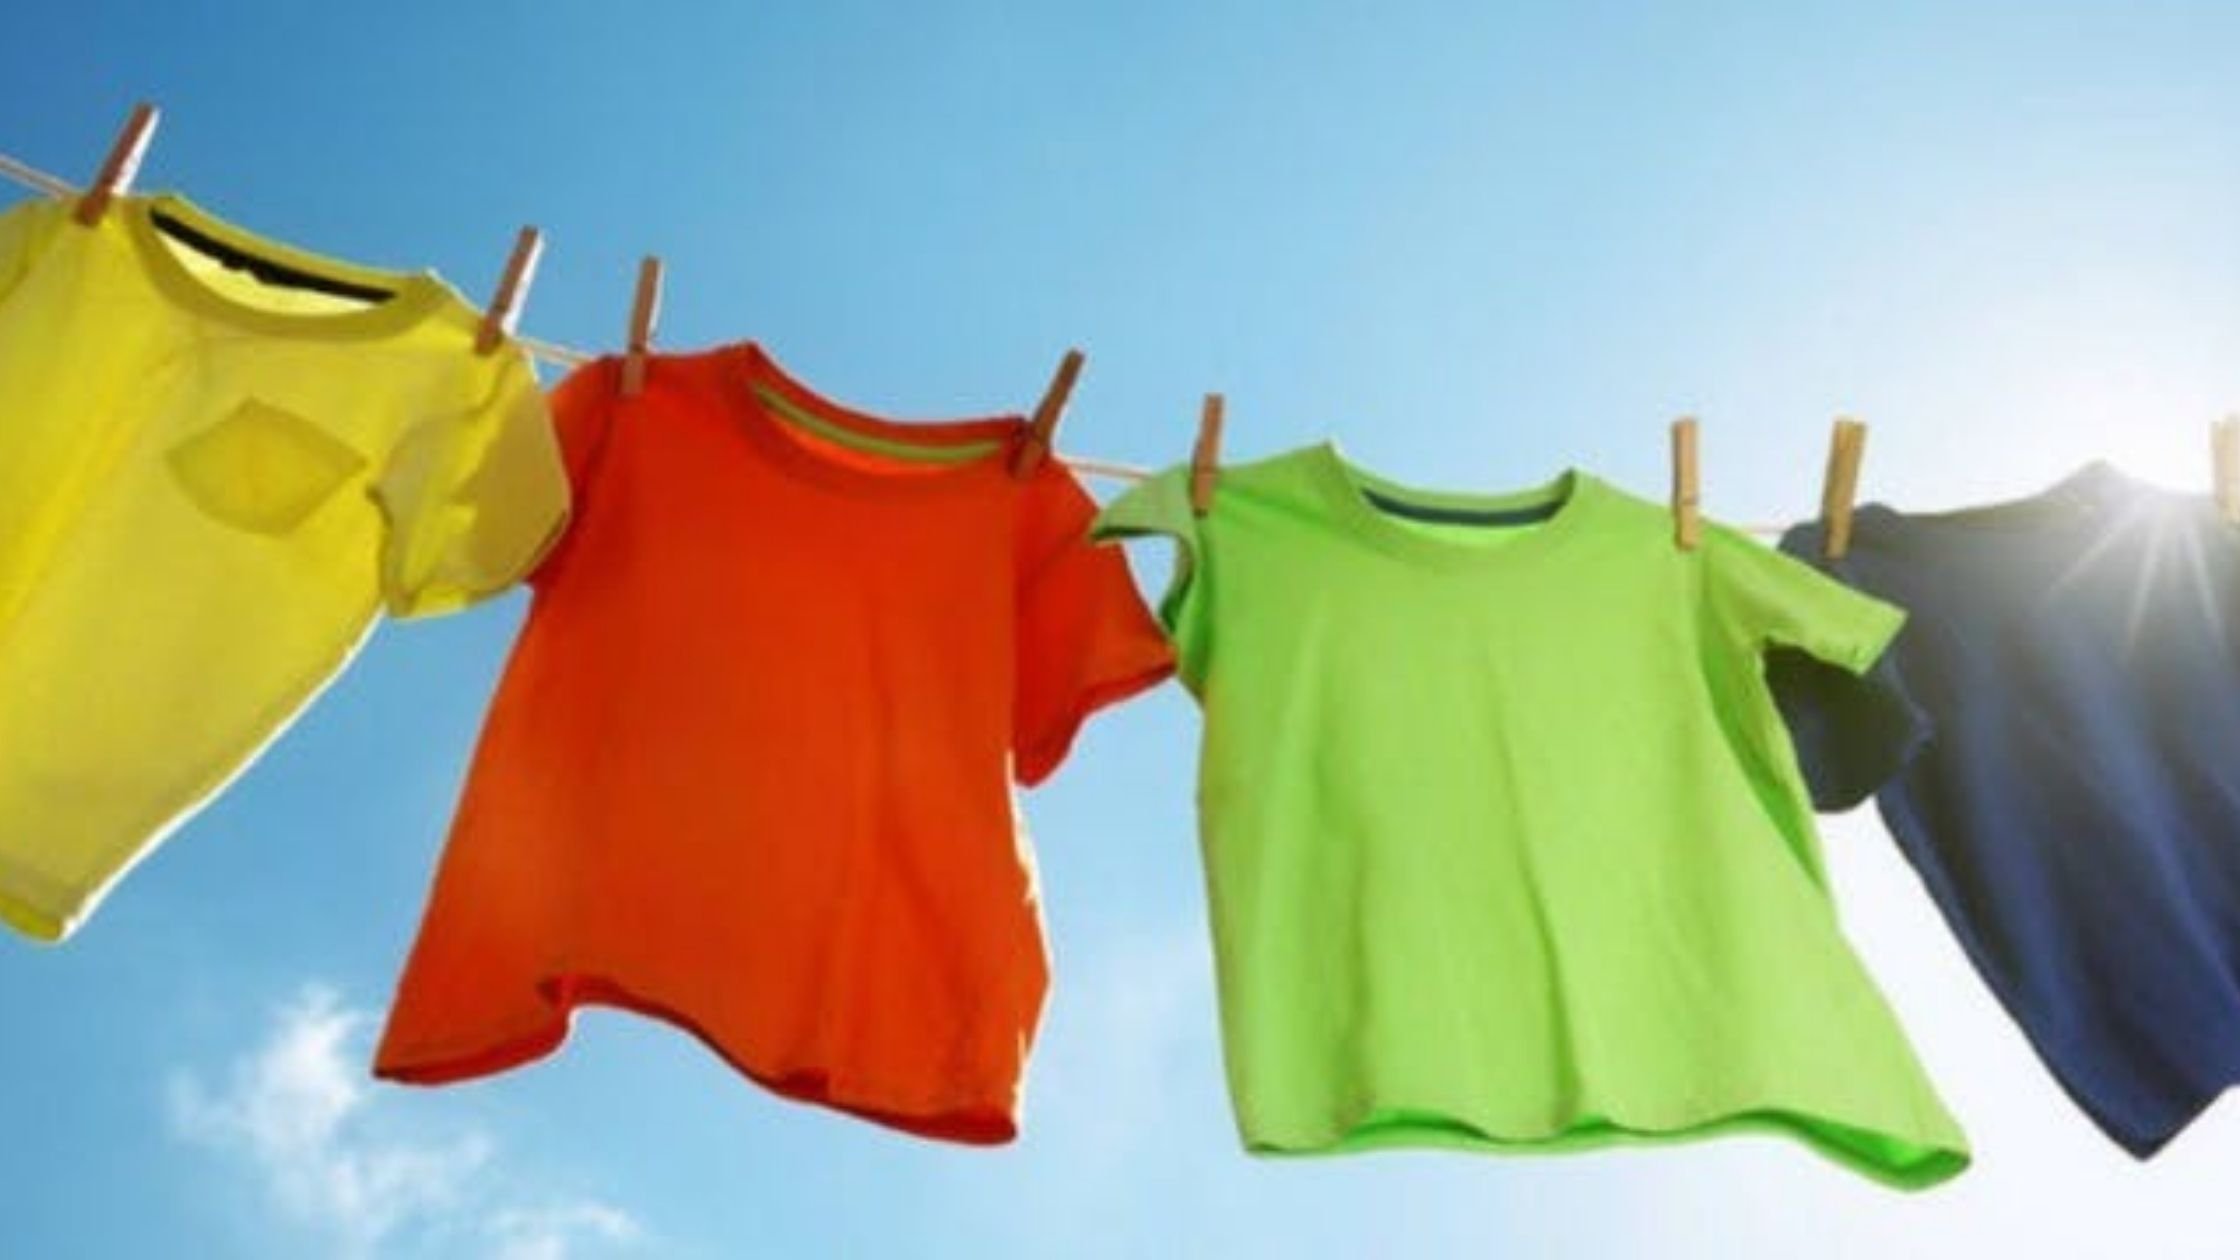 Pinning concept; colourful t-shirts pegged on washing line